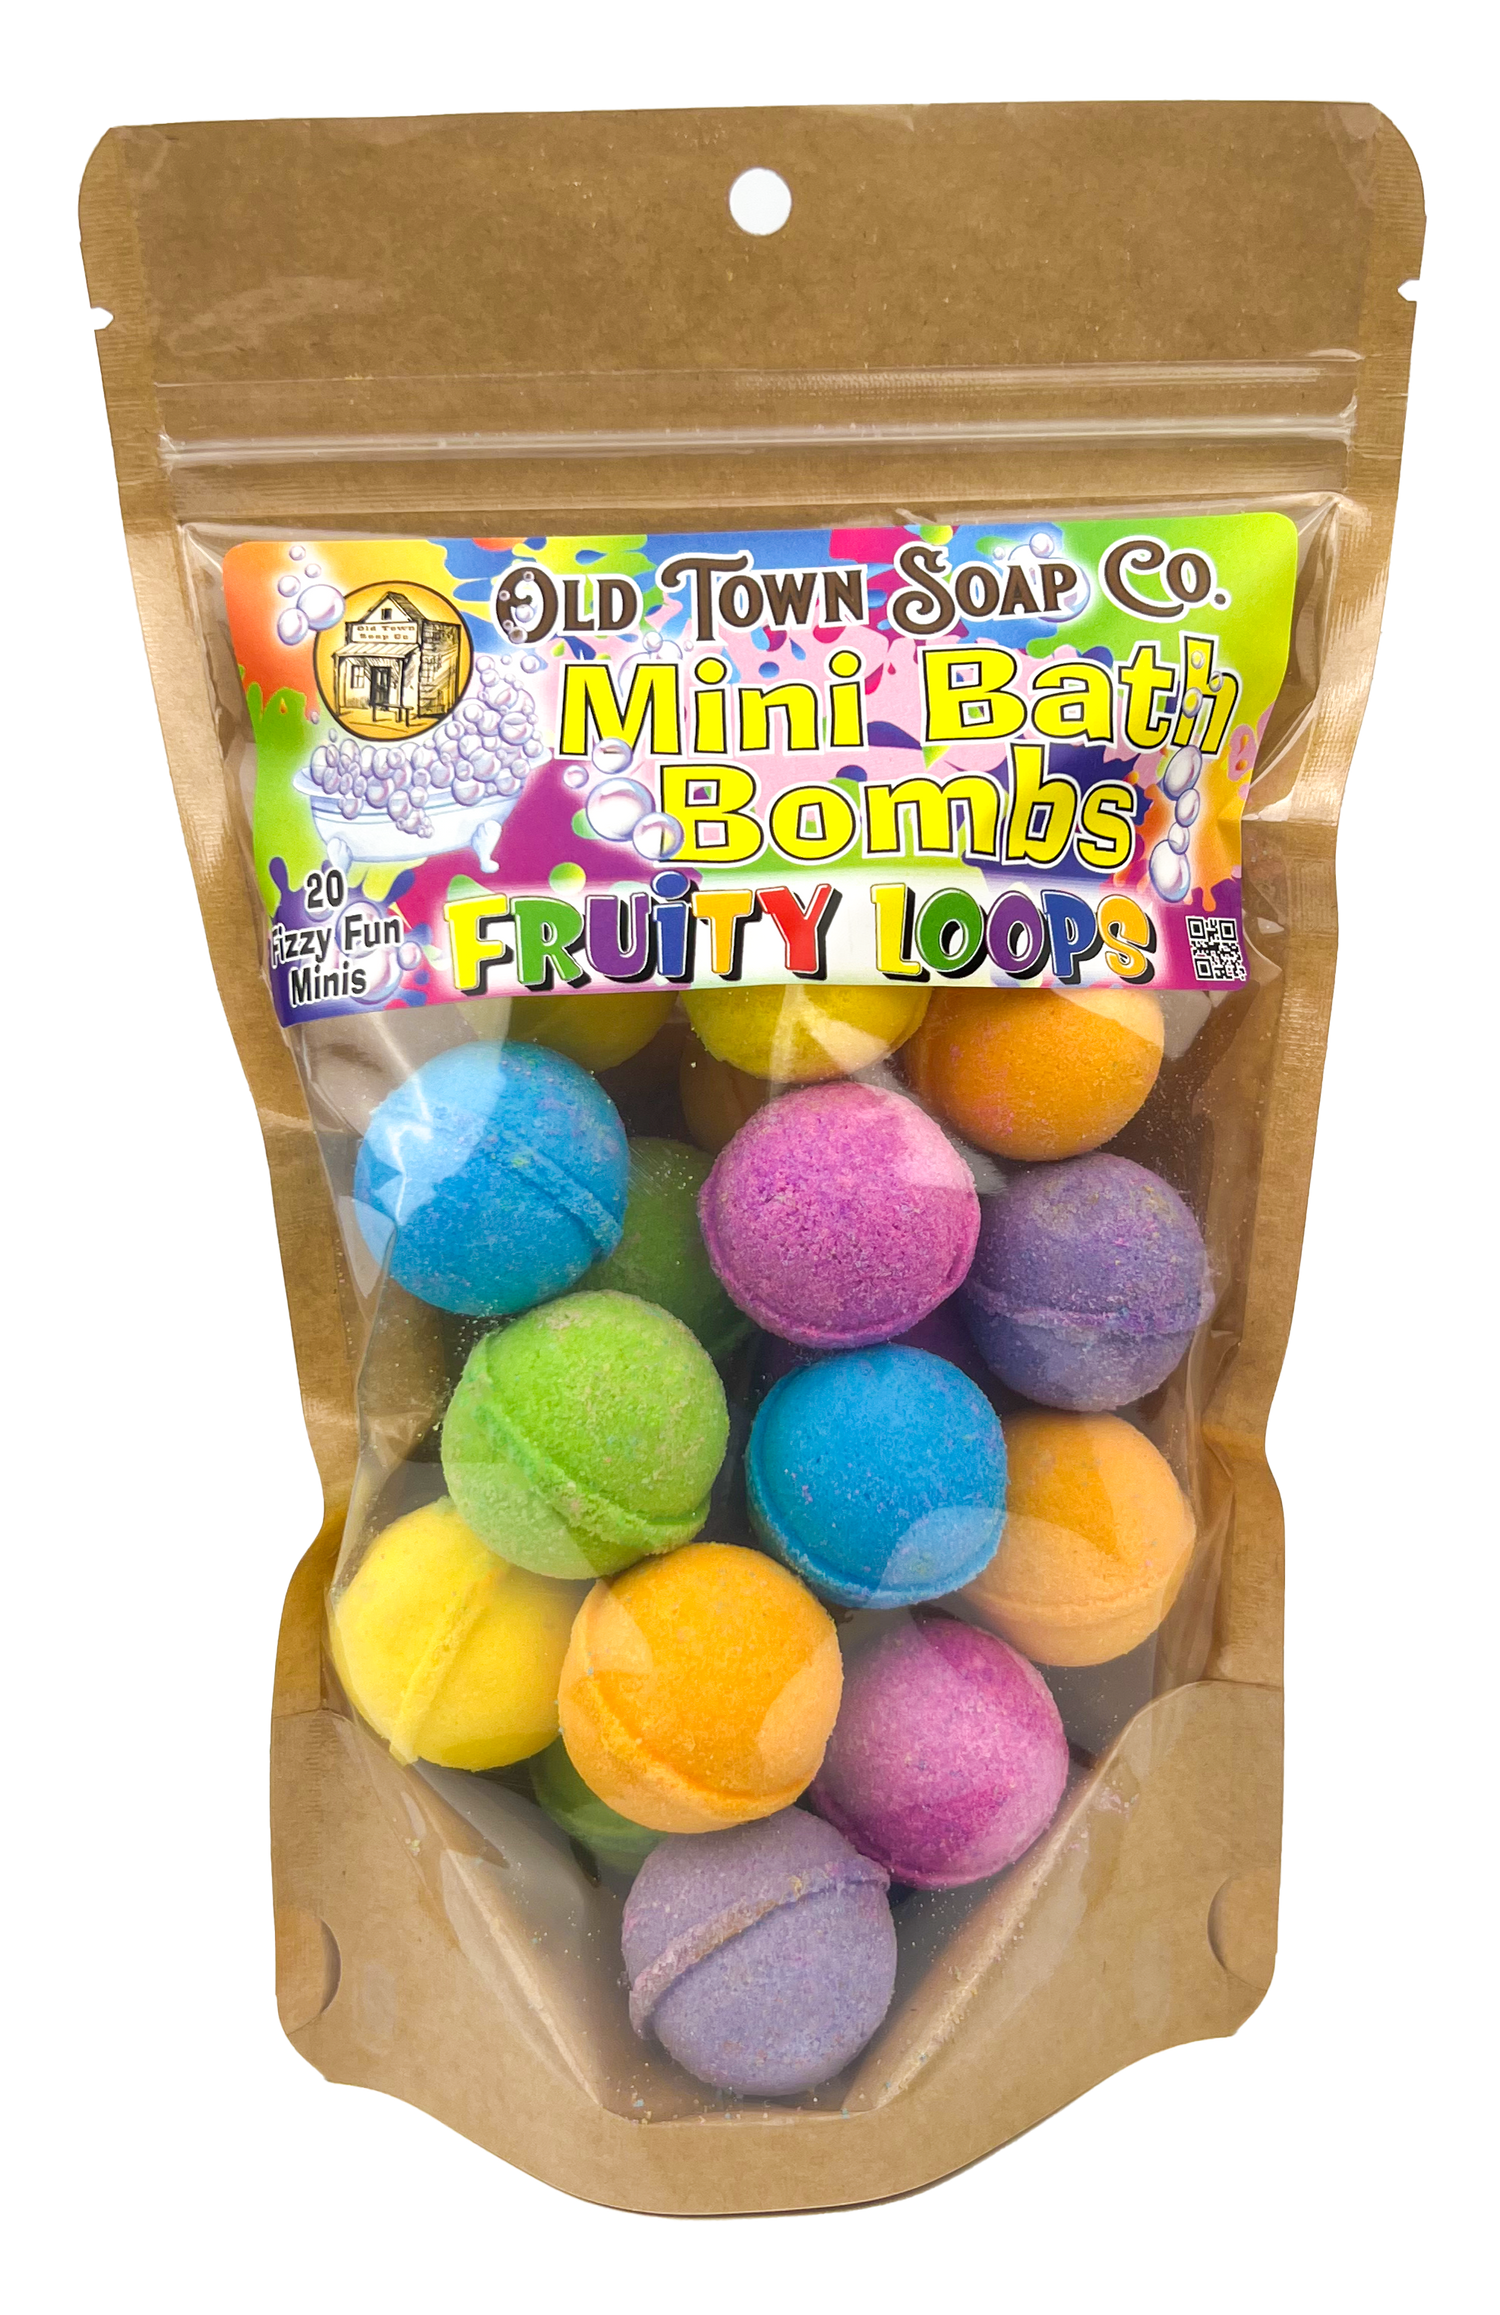 Mini Bath Bombs -8 Scents that Kids of all ages LOVE